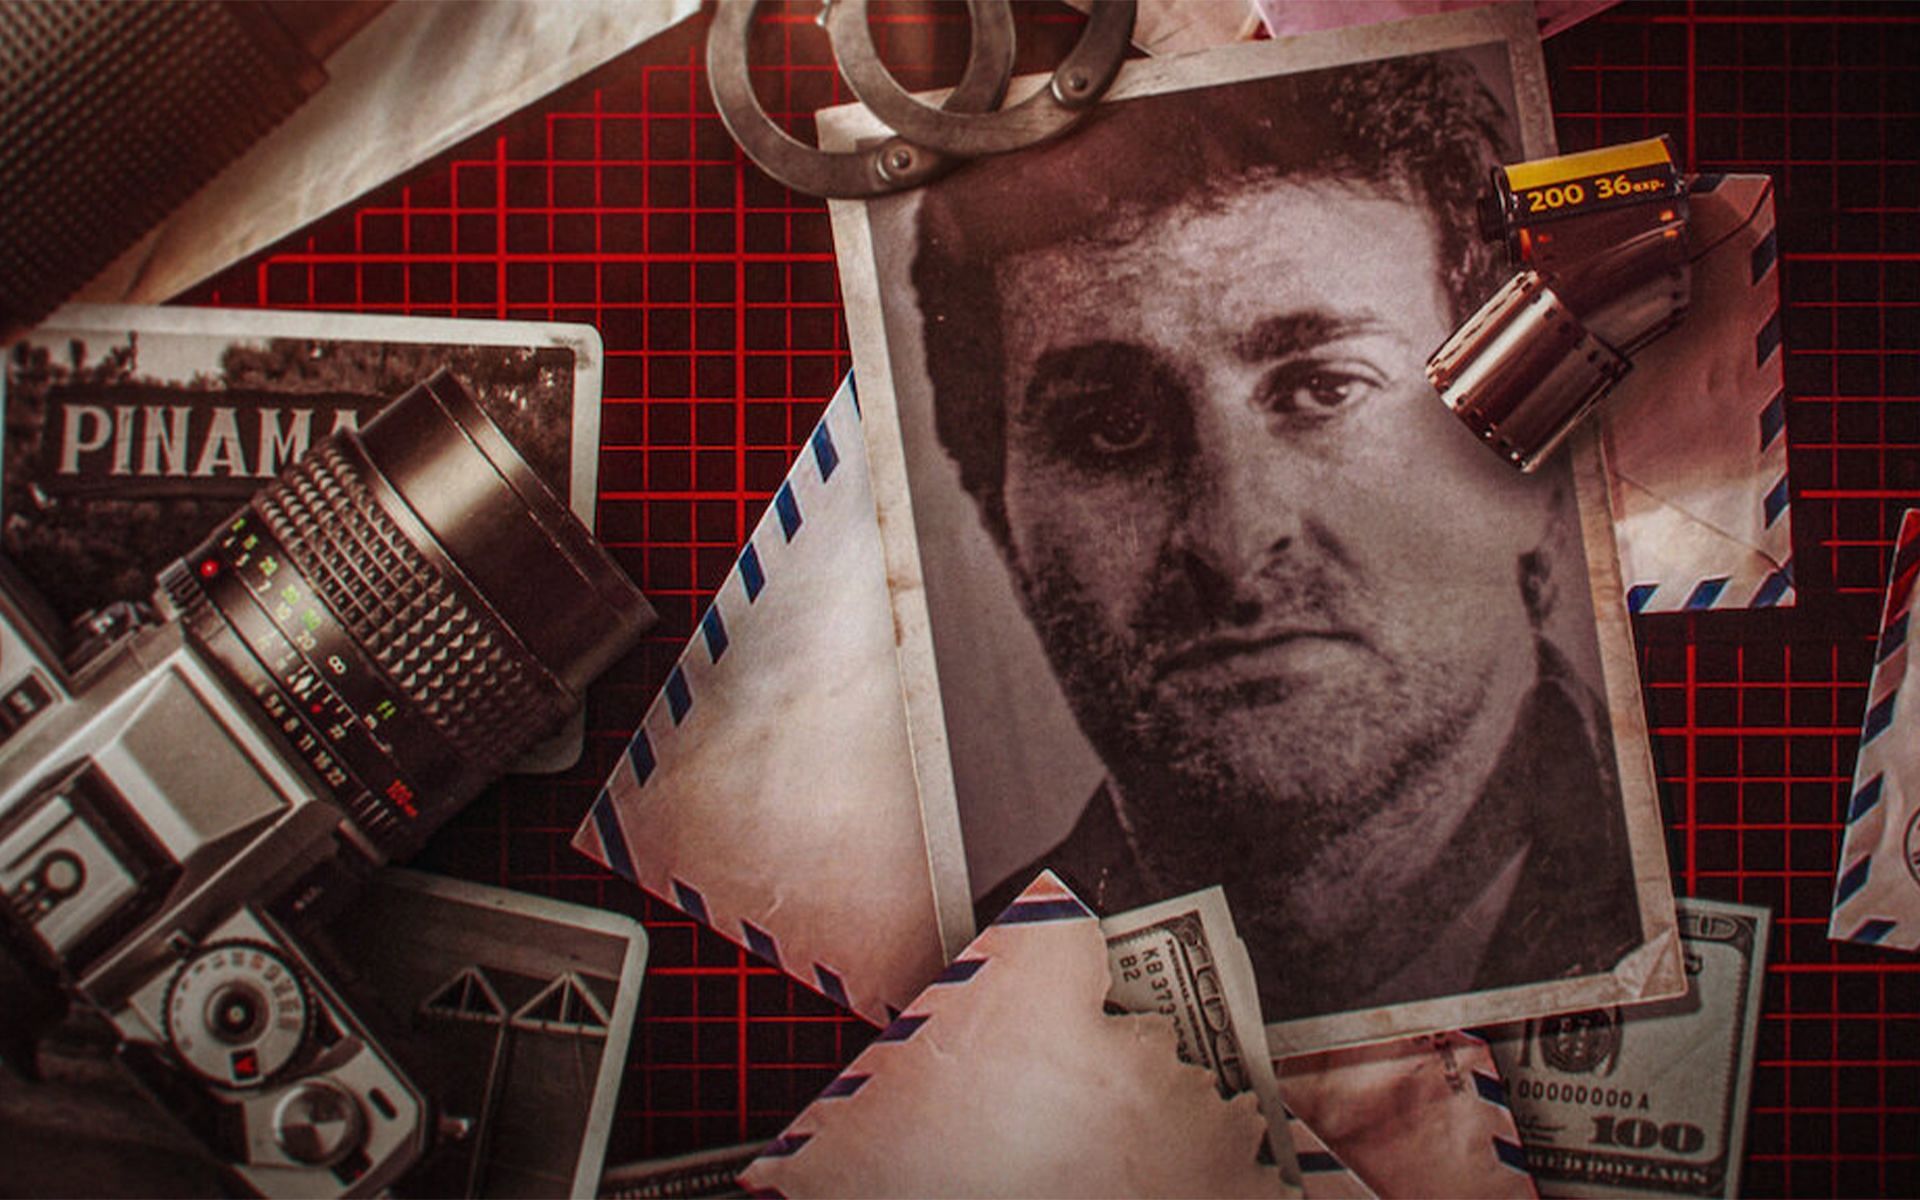 What happened to José Luis Cabezas? Netflix's The Photographer: Murder in  Pinamar to explore journalist's death and more